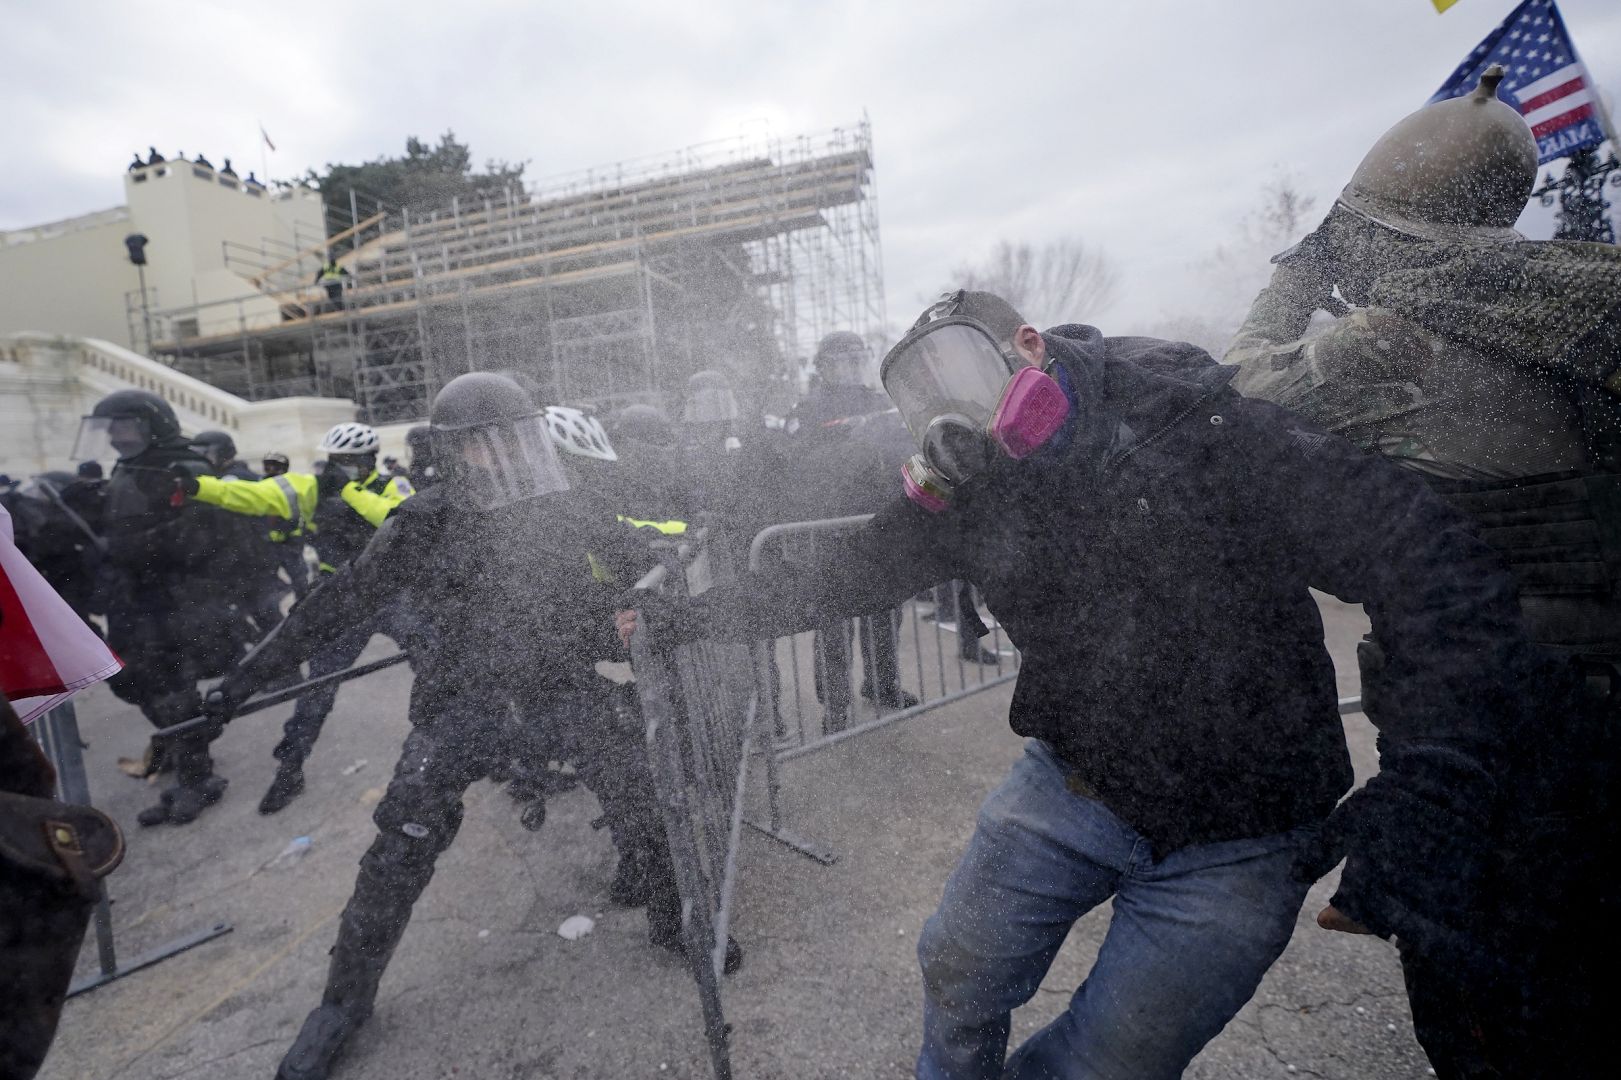 Trump supporters try to break through a police barrier at the Capitol in Washington, USA. January 6, 2021